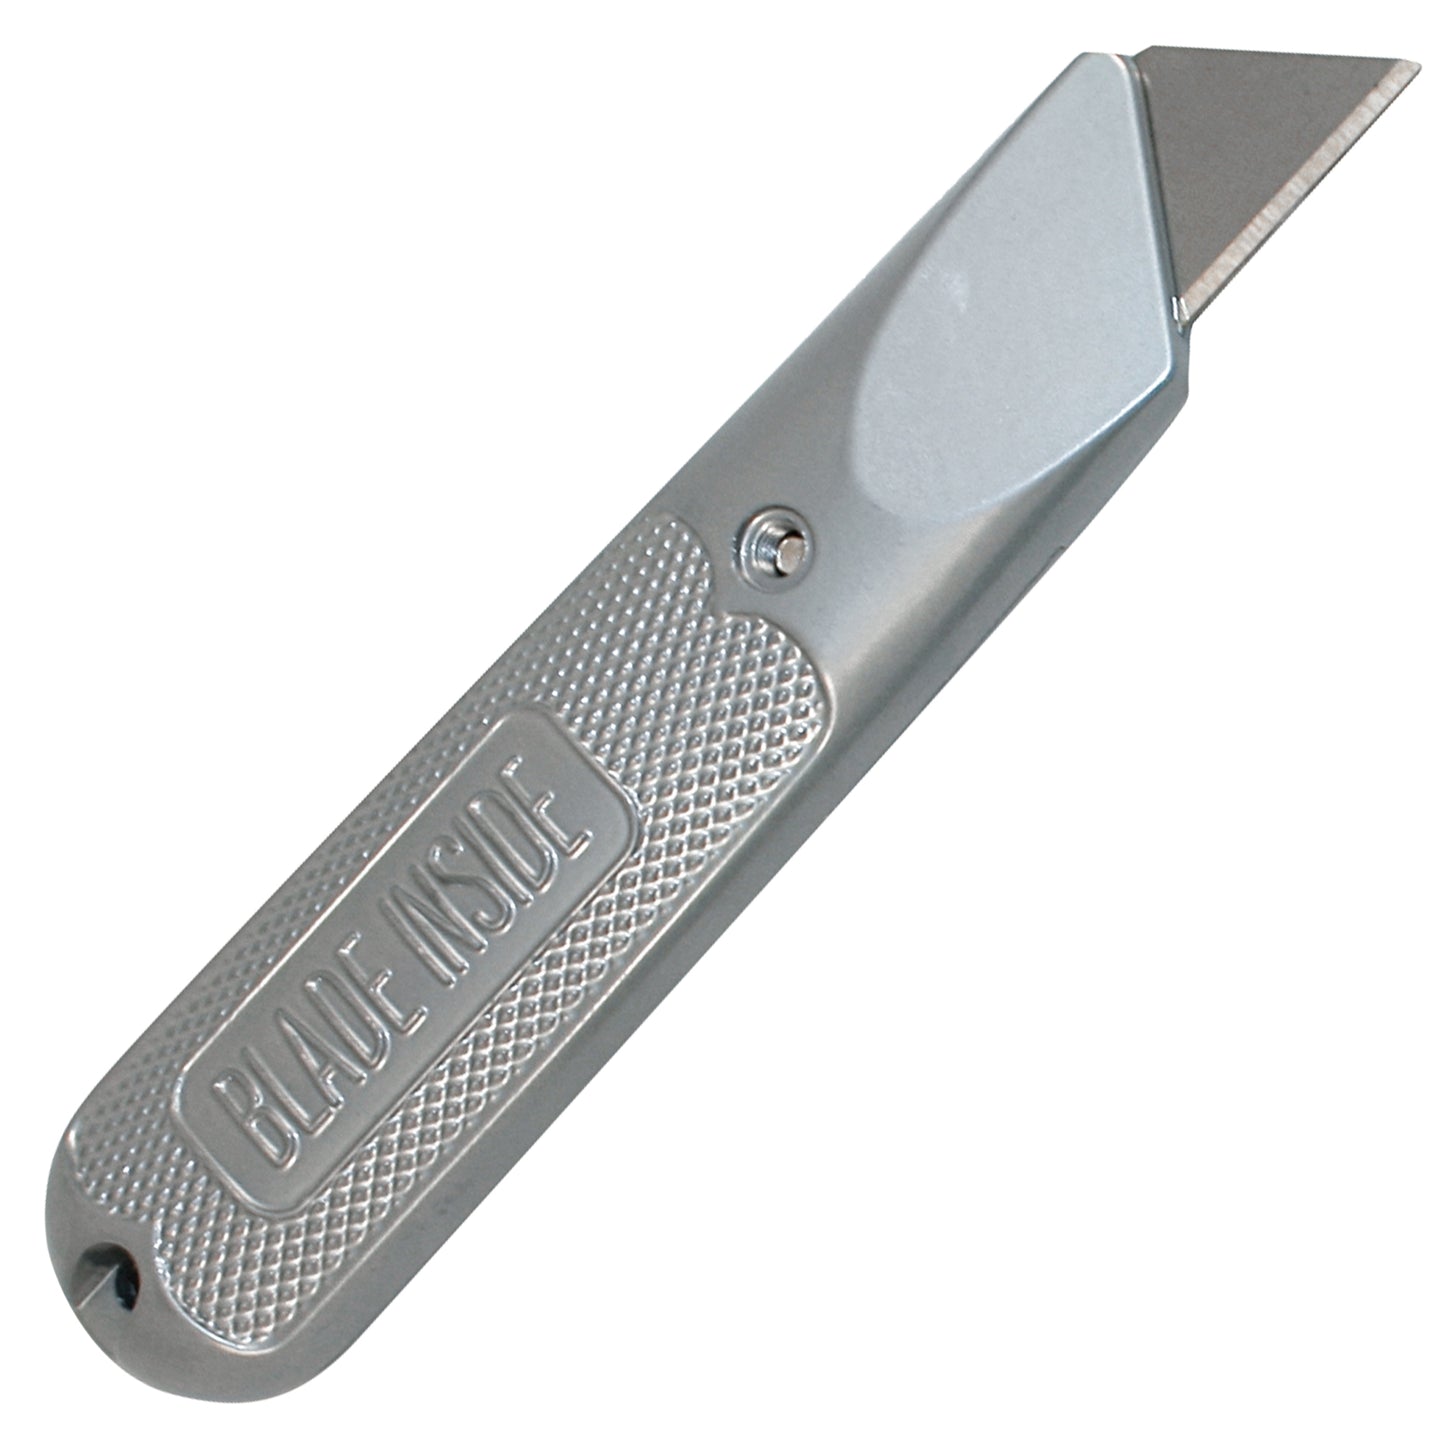 DW199C Checkered Handle Utility Knife with Fixed Blade